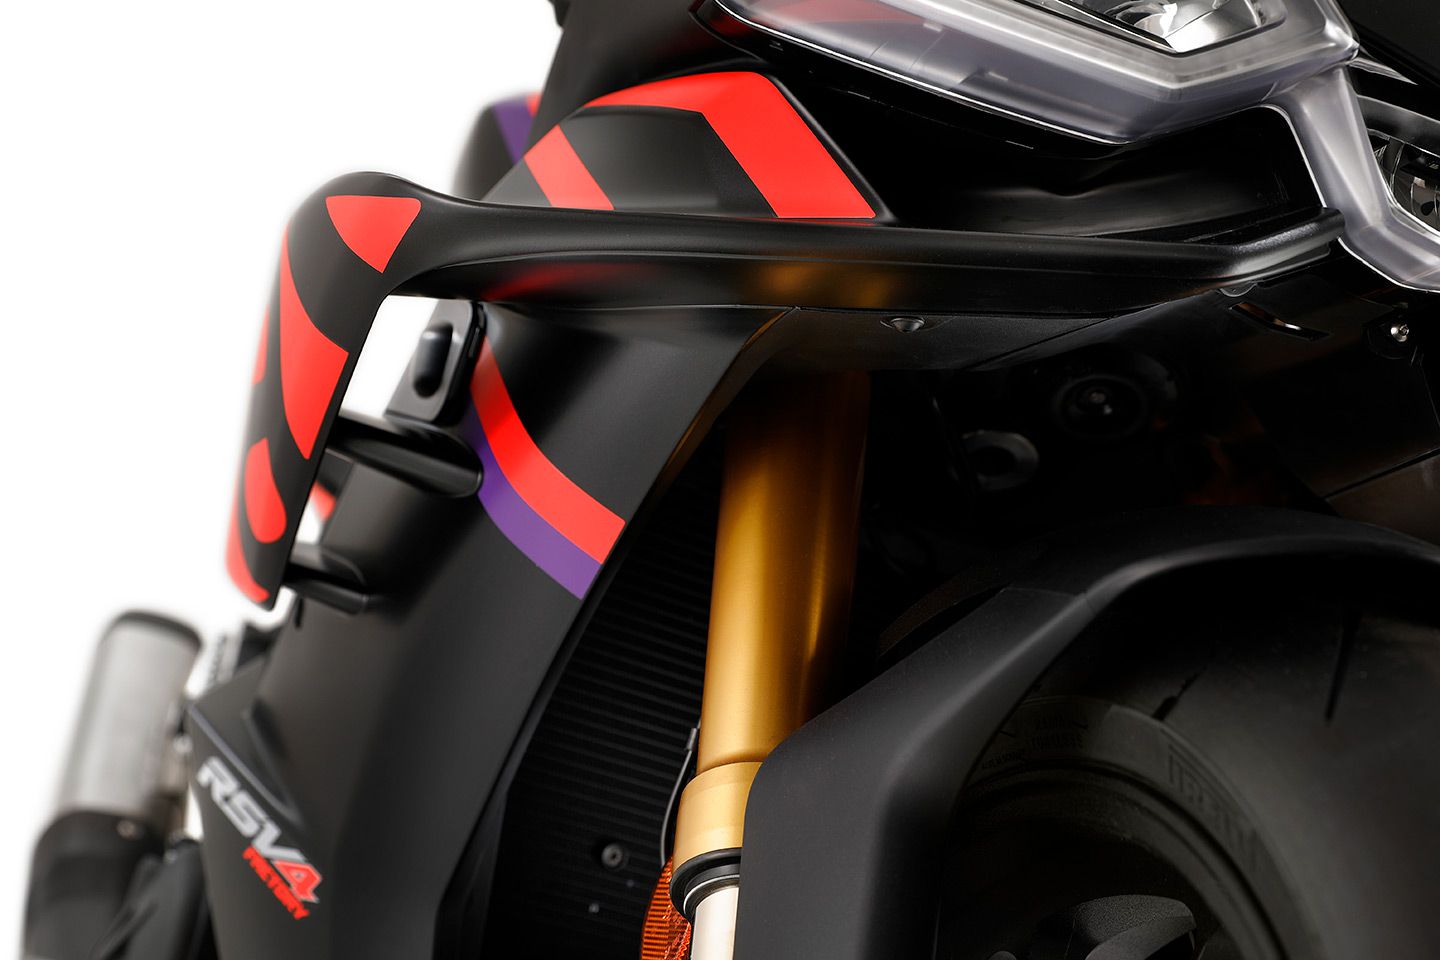 Aerodynamic winglets are integrated into the RSV4 fairing.